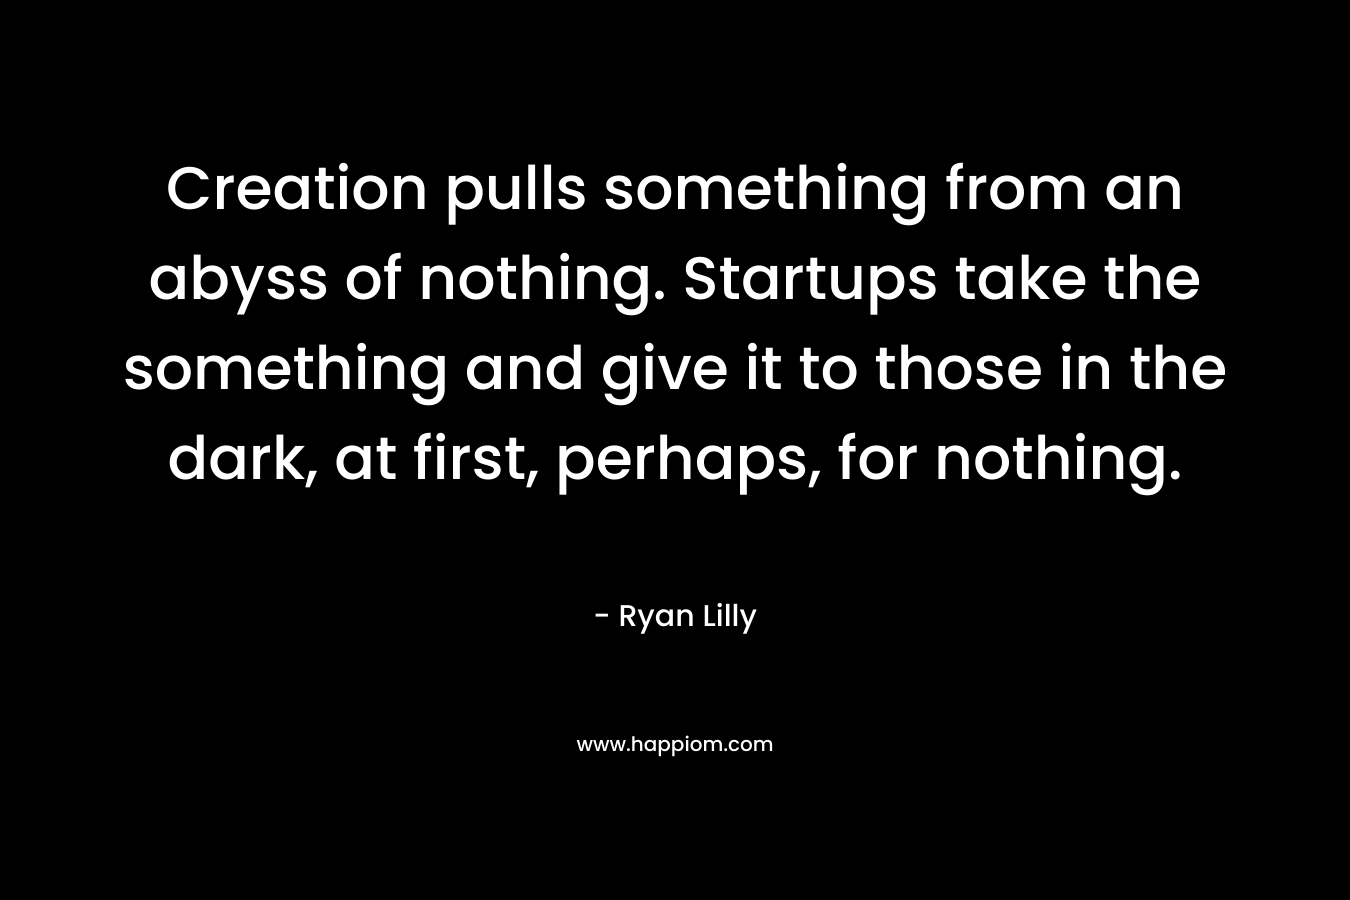 Creation pulls something from an abyss of nothing. Startups take the something and give it to those in the dark, at first, perhaps, for nothing. – Ryan Lilly